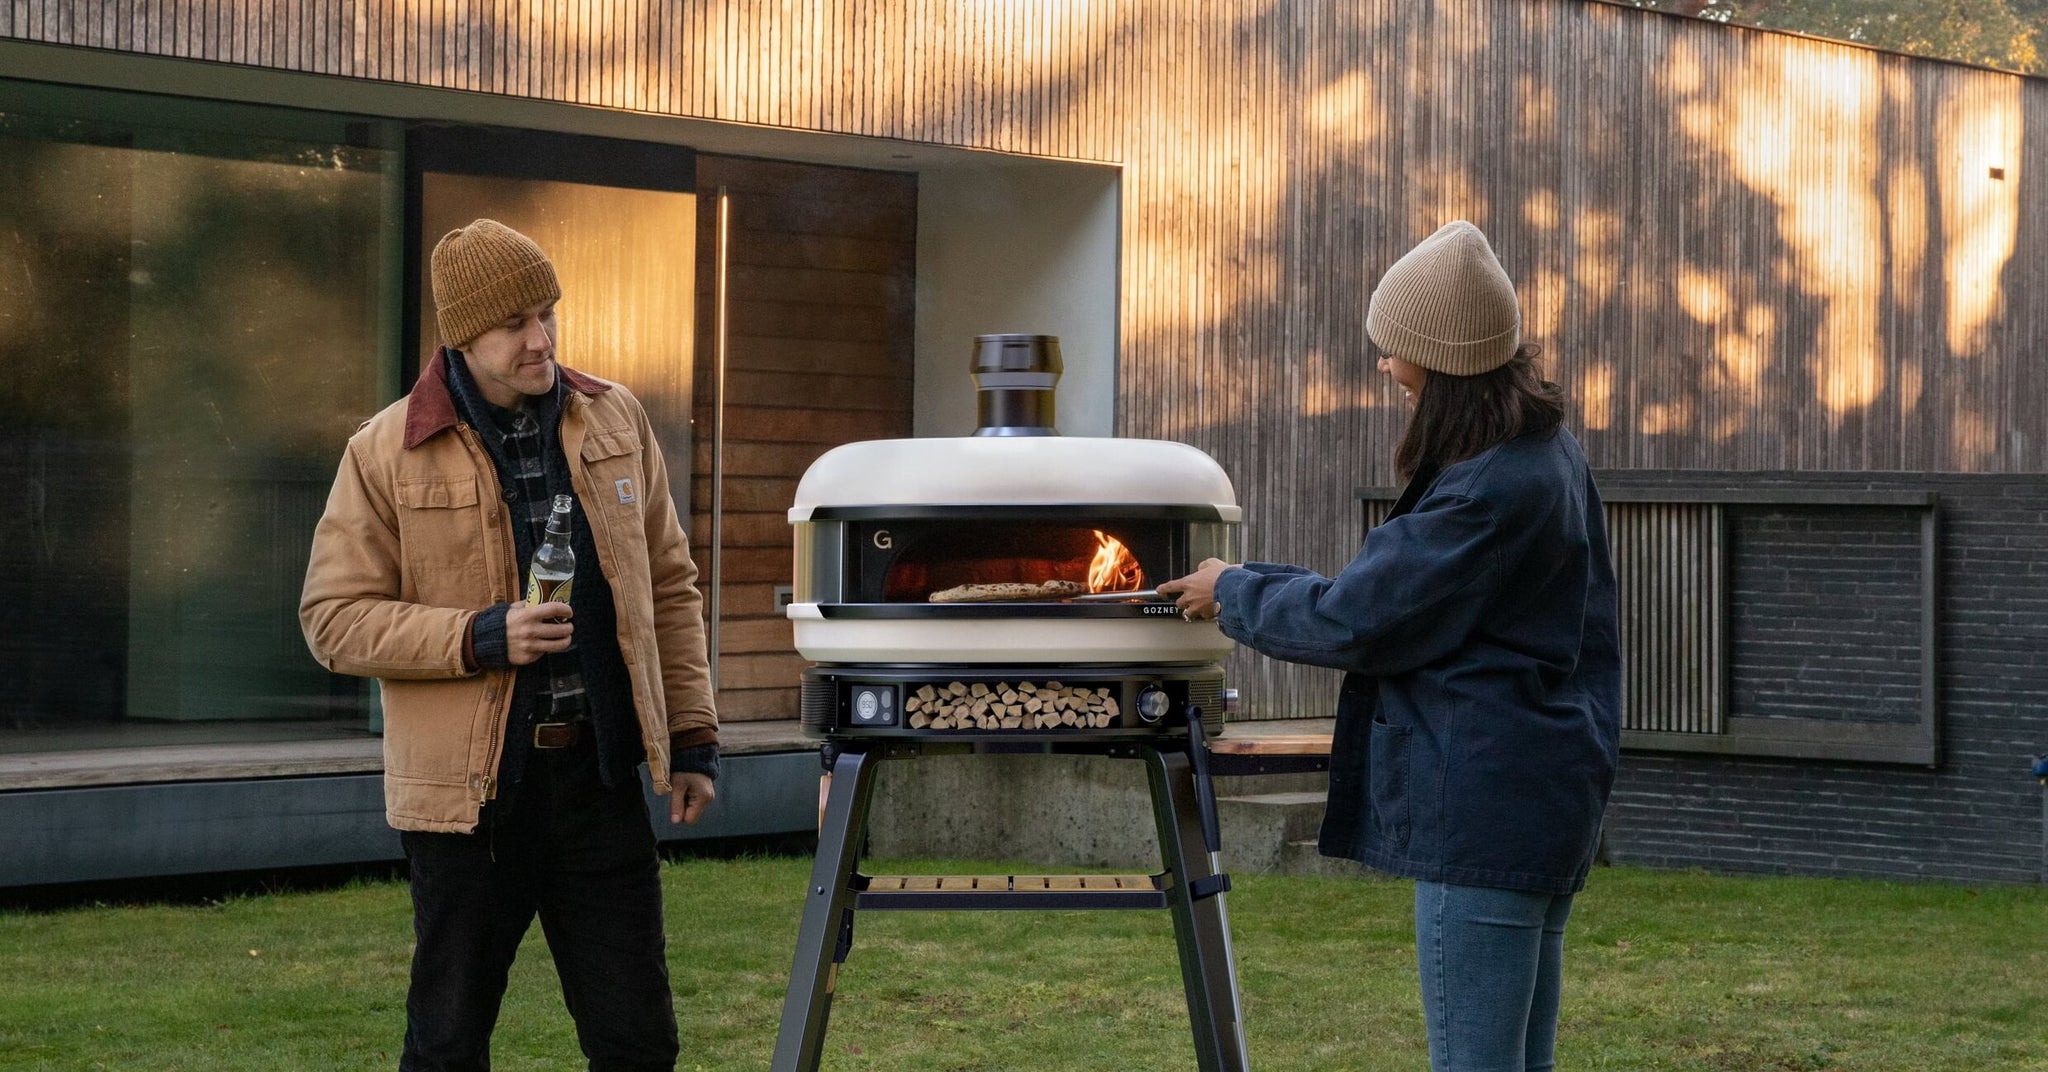 How to use your Roccbox during winter - Cooking outside all year long!